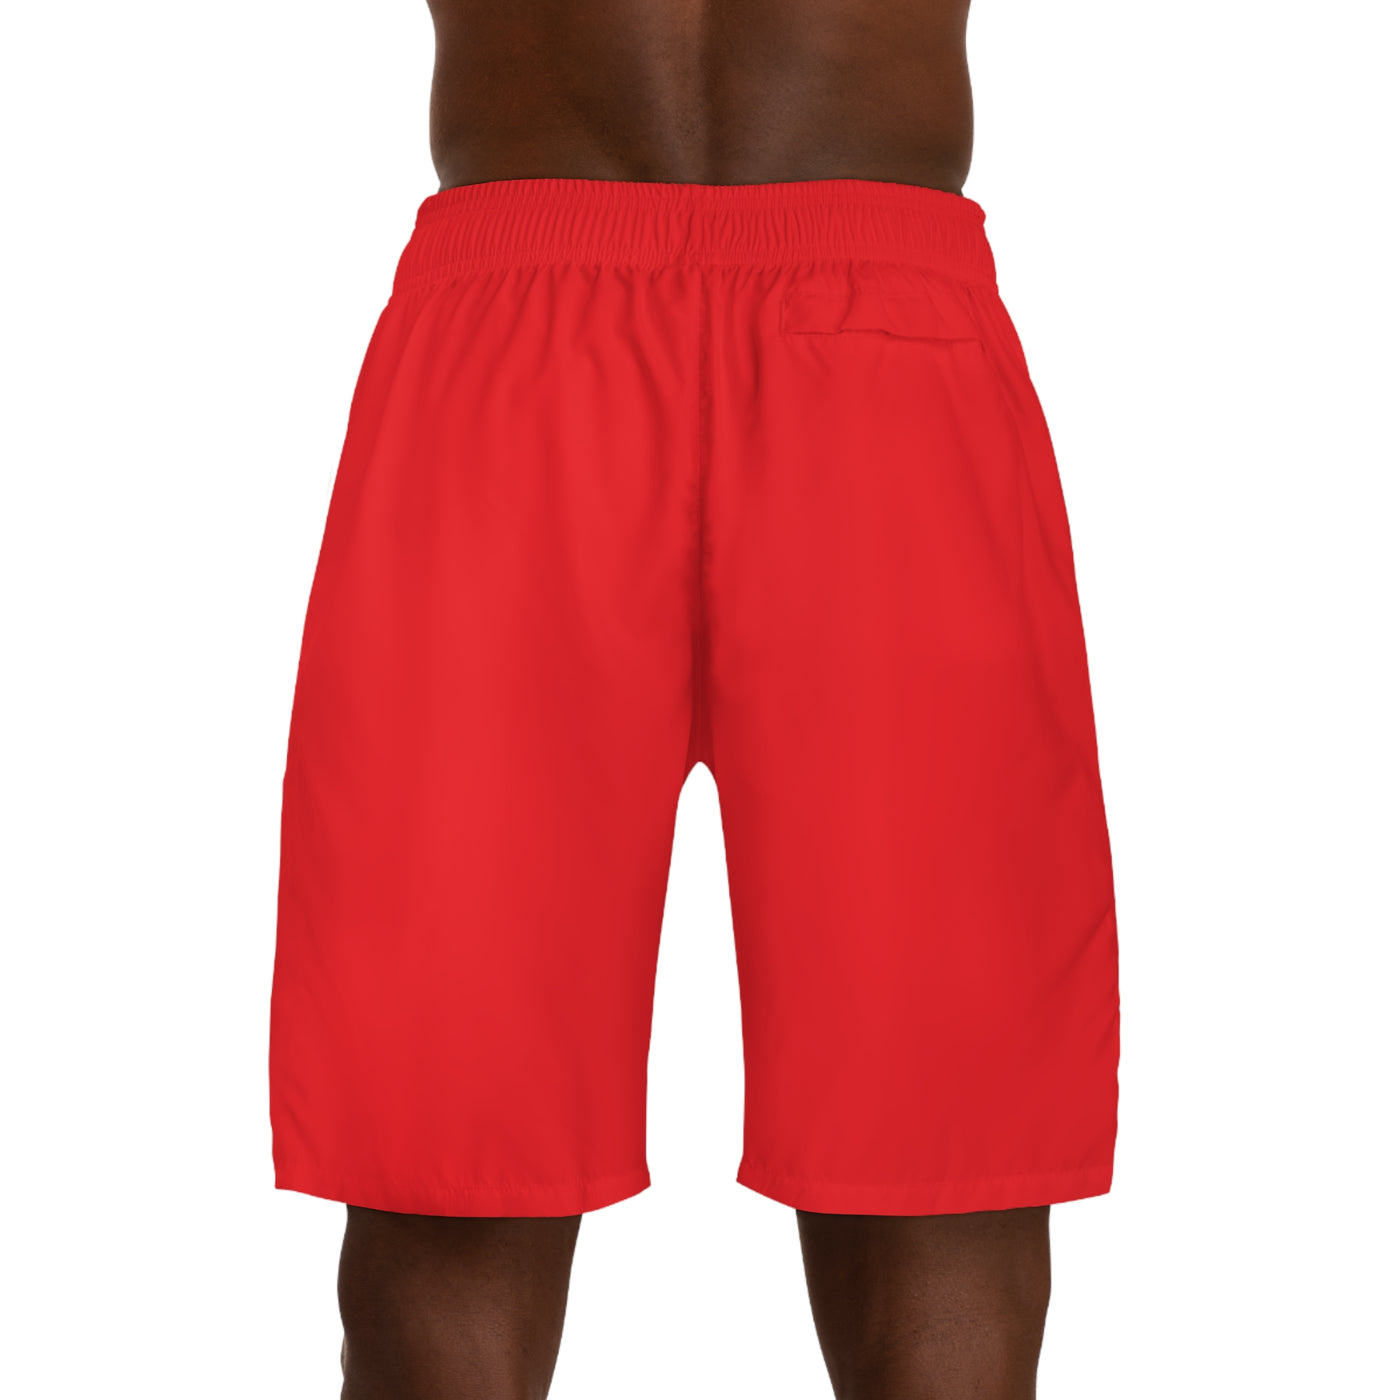 Men's Jogger Shorts (AOP) - All-over printed jogger shorts for men, featuring a comfortable fit and suitable for various casual activities and workouts.